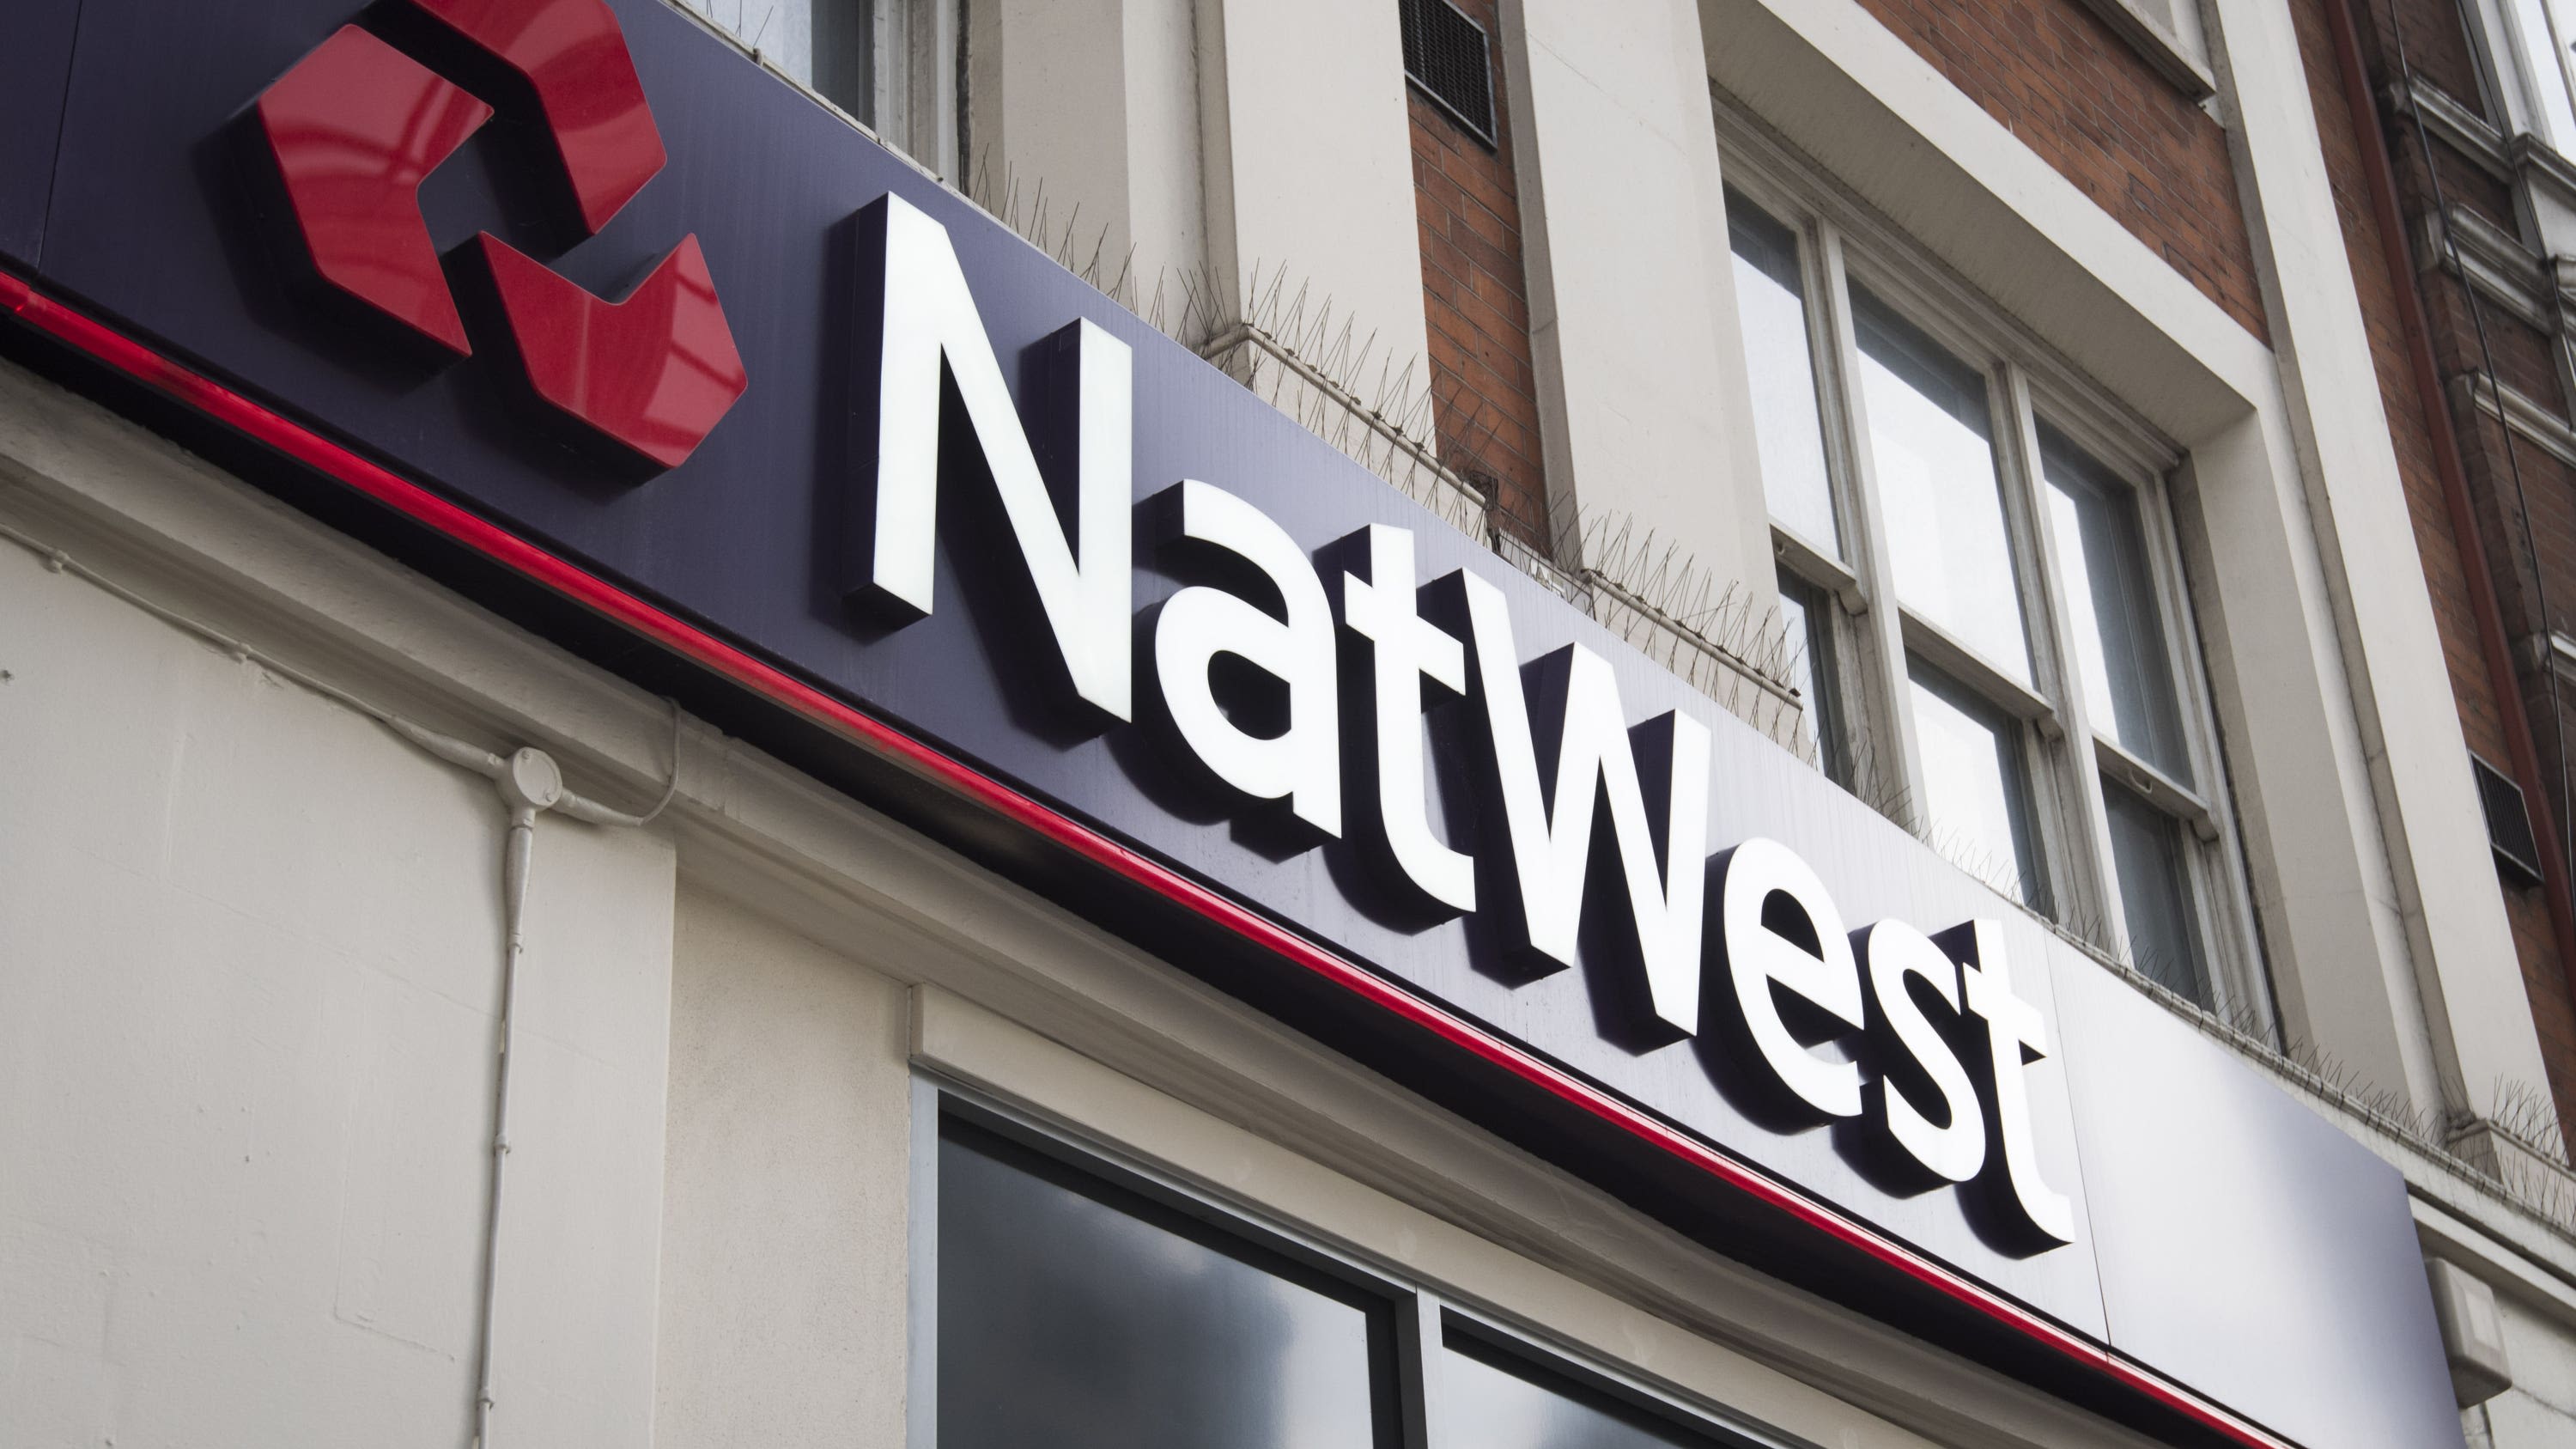 NatWest share sale in jeopardy after General Election called, analysts warn